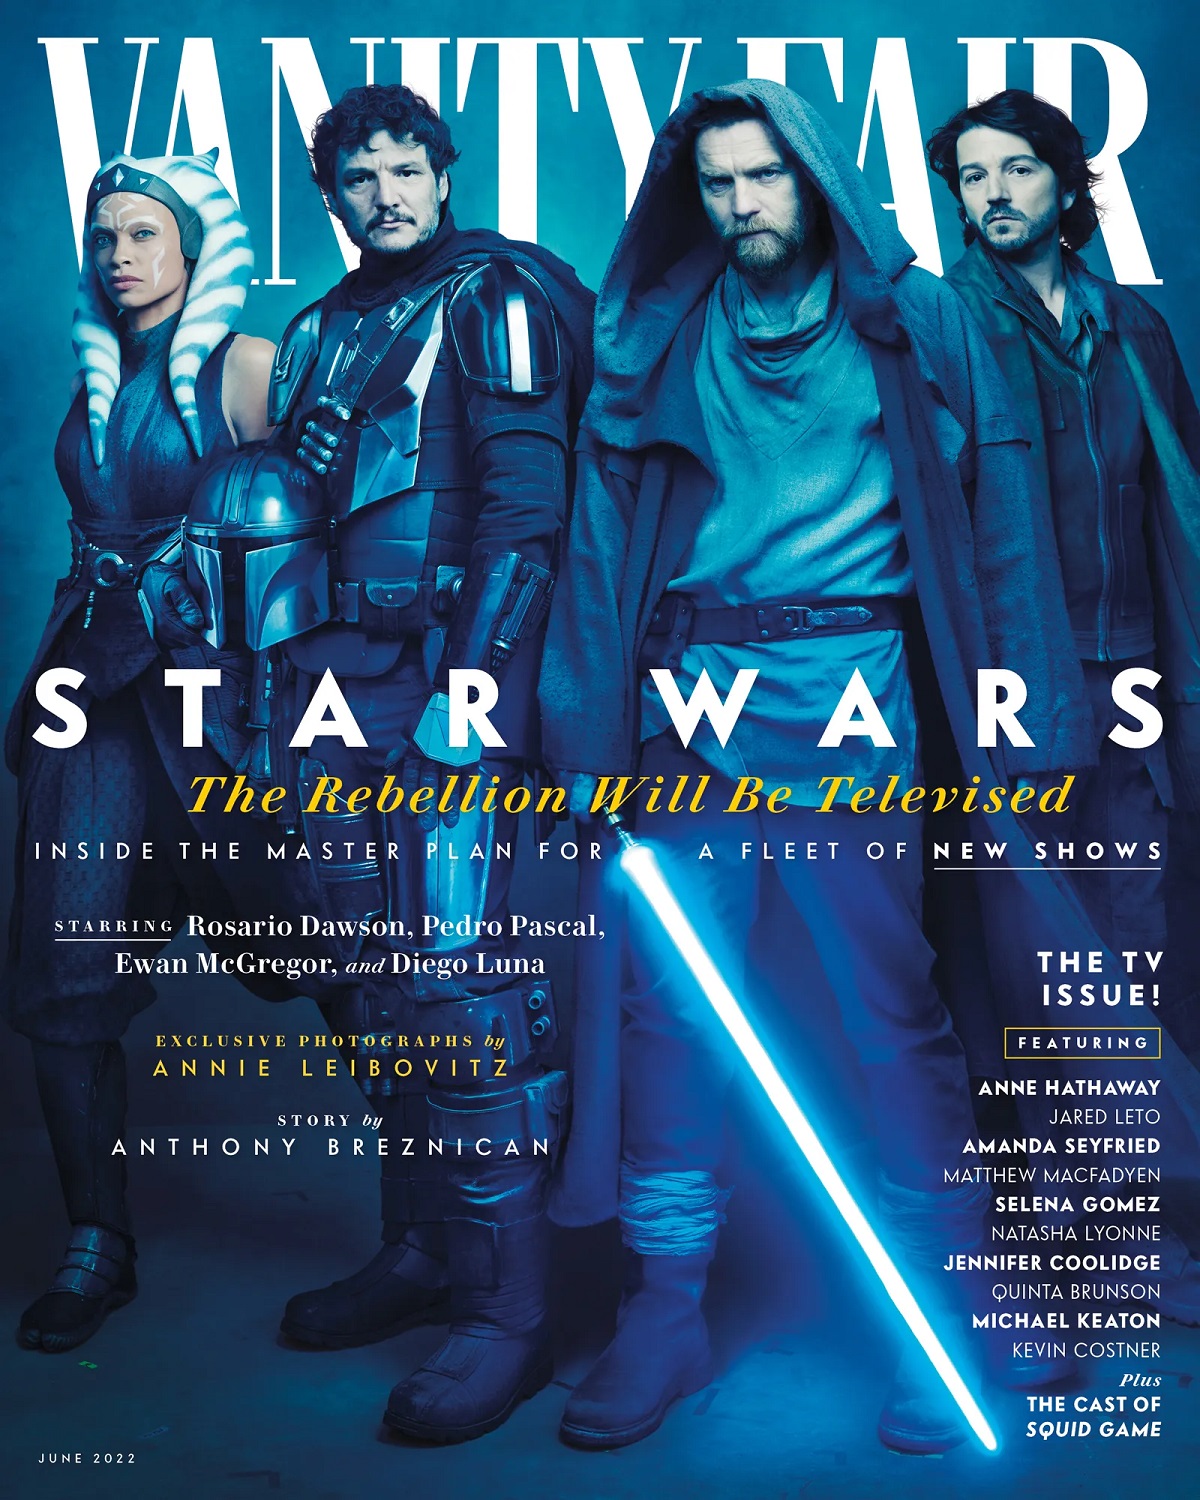 Image of a Star Wars 'Vanity Fair' cover from June 2022. Group full-body photo of Rosario Dawson as Ashoka Tano, Pedro Pascal as the Mandalorian, Ewan McGregor as Obi-Wan Kenobi, and Diego Luna as Cassian Andor. The cover reads "Star Wars: The Rebellion Will Be Televised. Inside the master plan for a fleet of new shows." This is the 'Vanity Fair' TV issue.